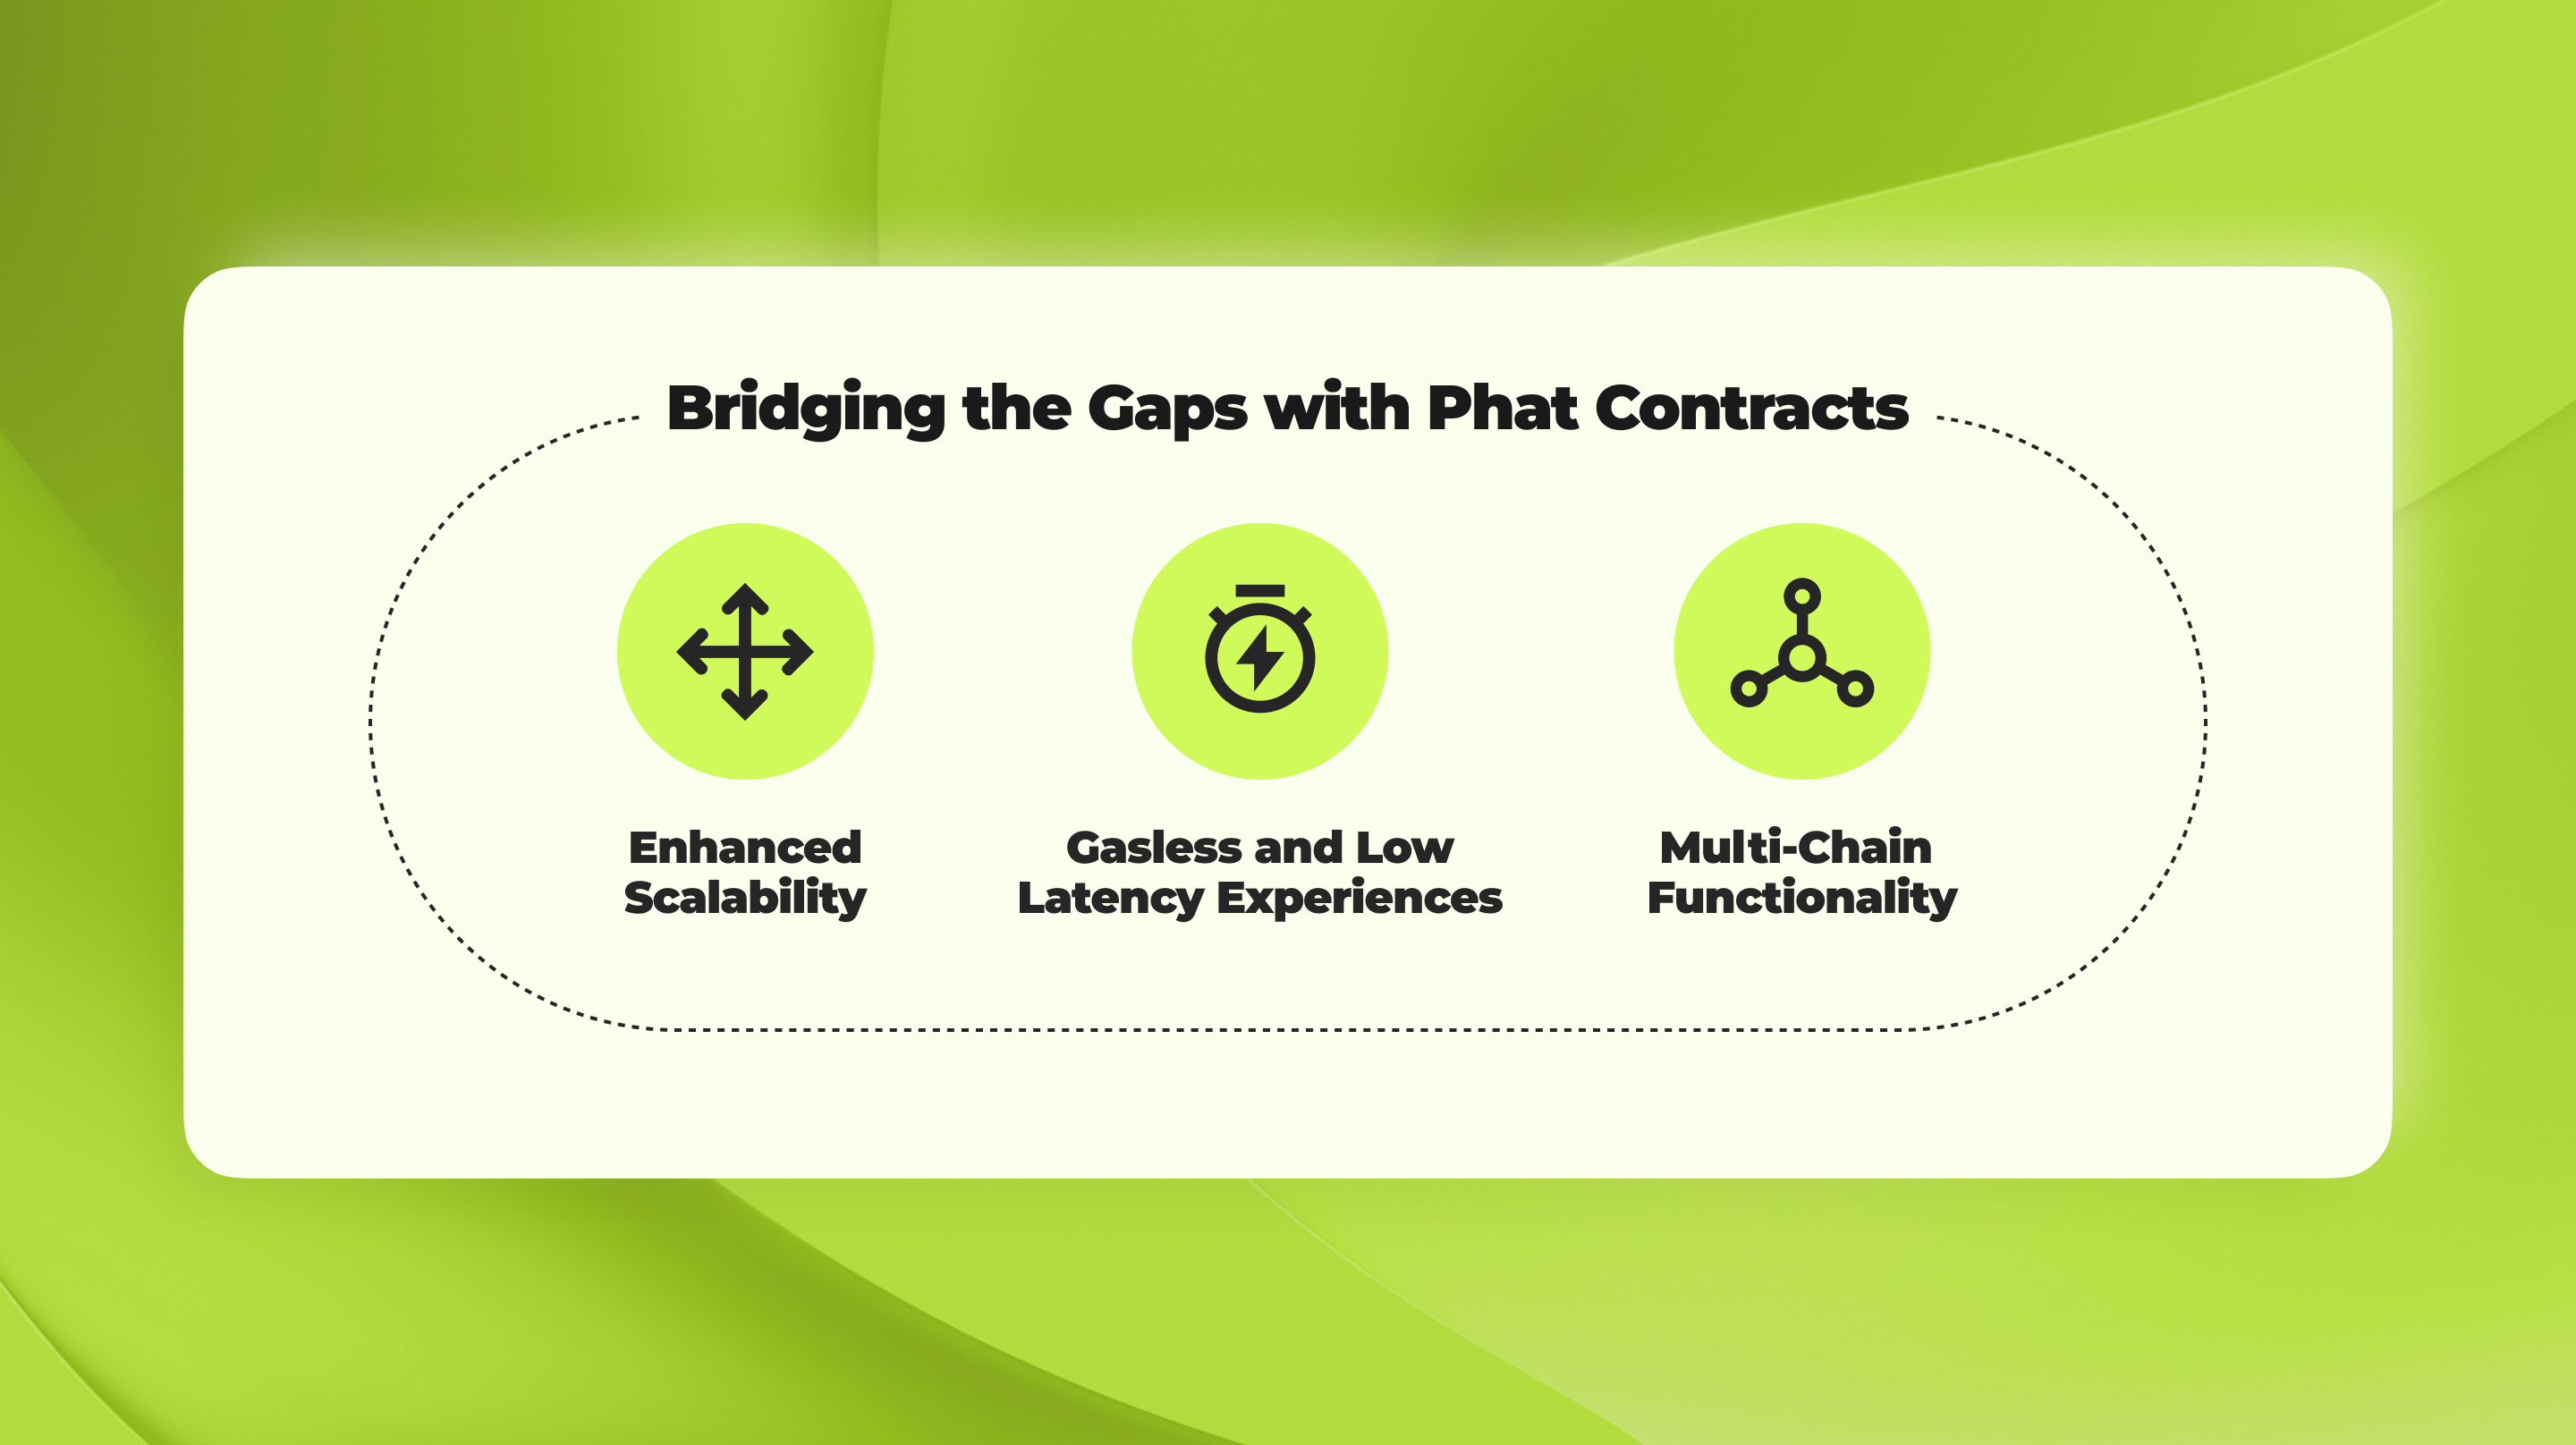 Bridging the Gaps with Phat Contracts